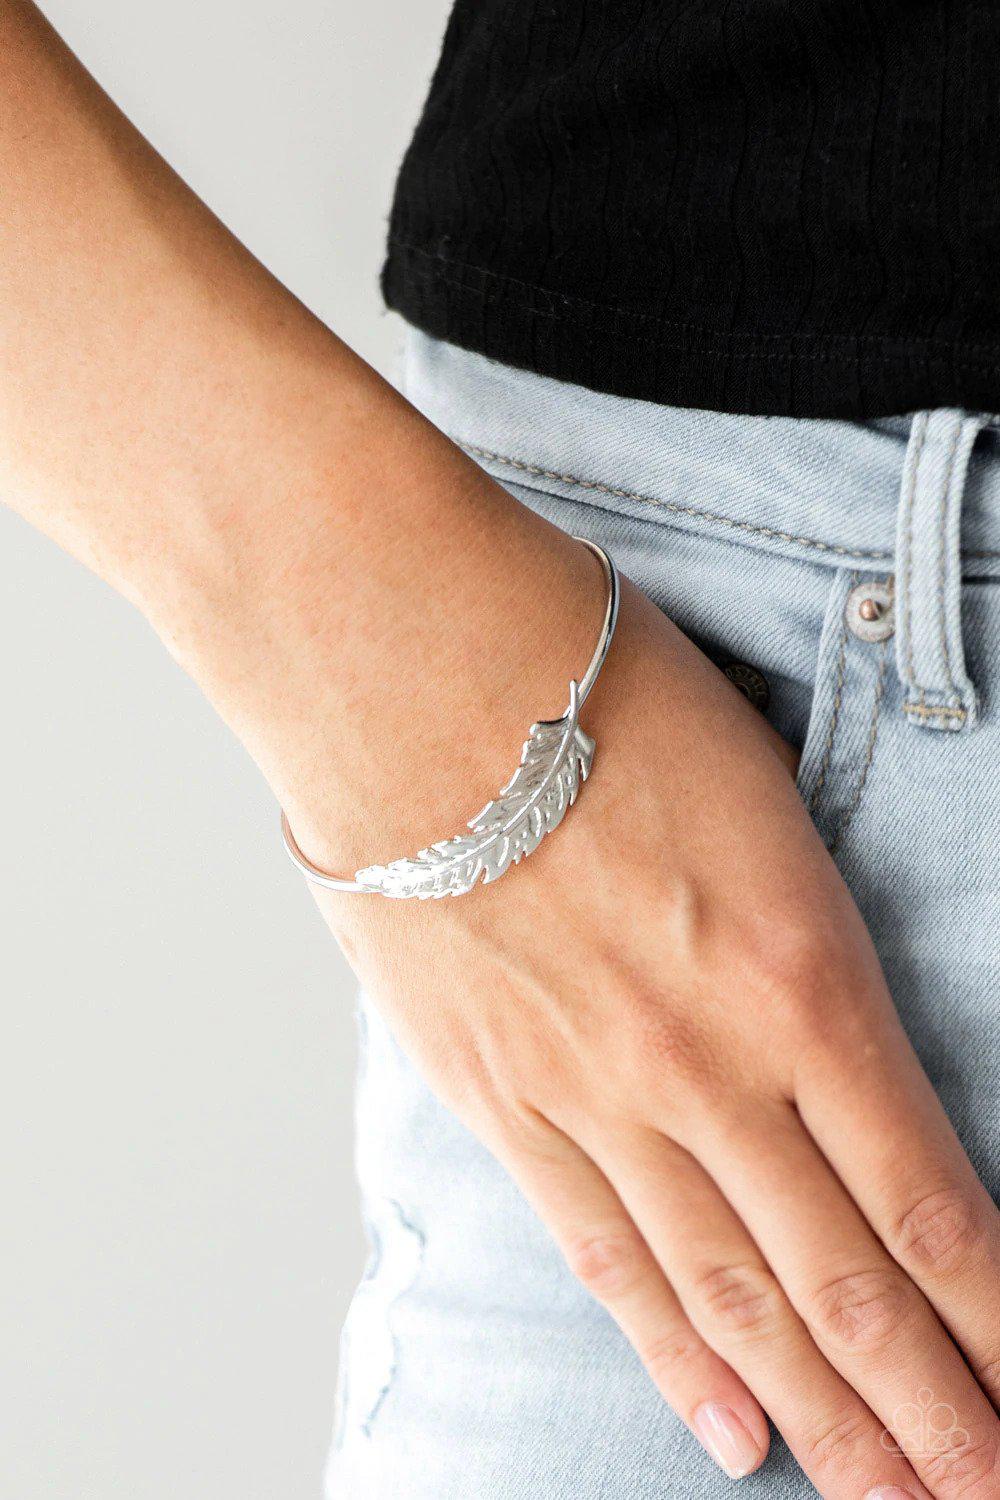 How Do You Like This FEATHER Silver Cuff Bracelet - Paparazzi Accessories- lightbox - CarasShop.com - $5 Jewelry by Cara Jewels